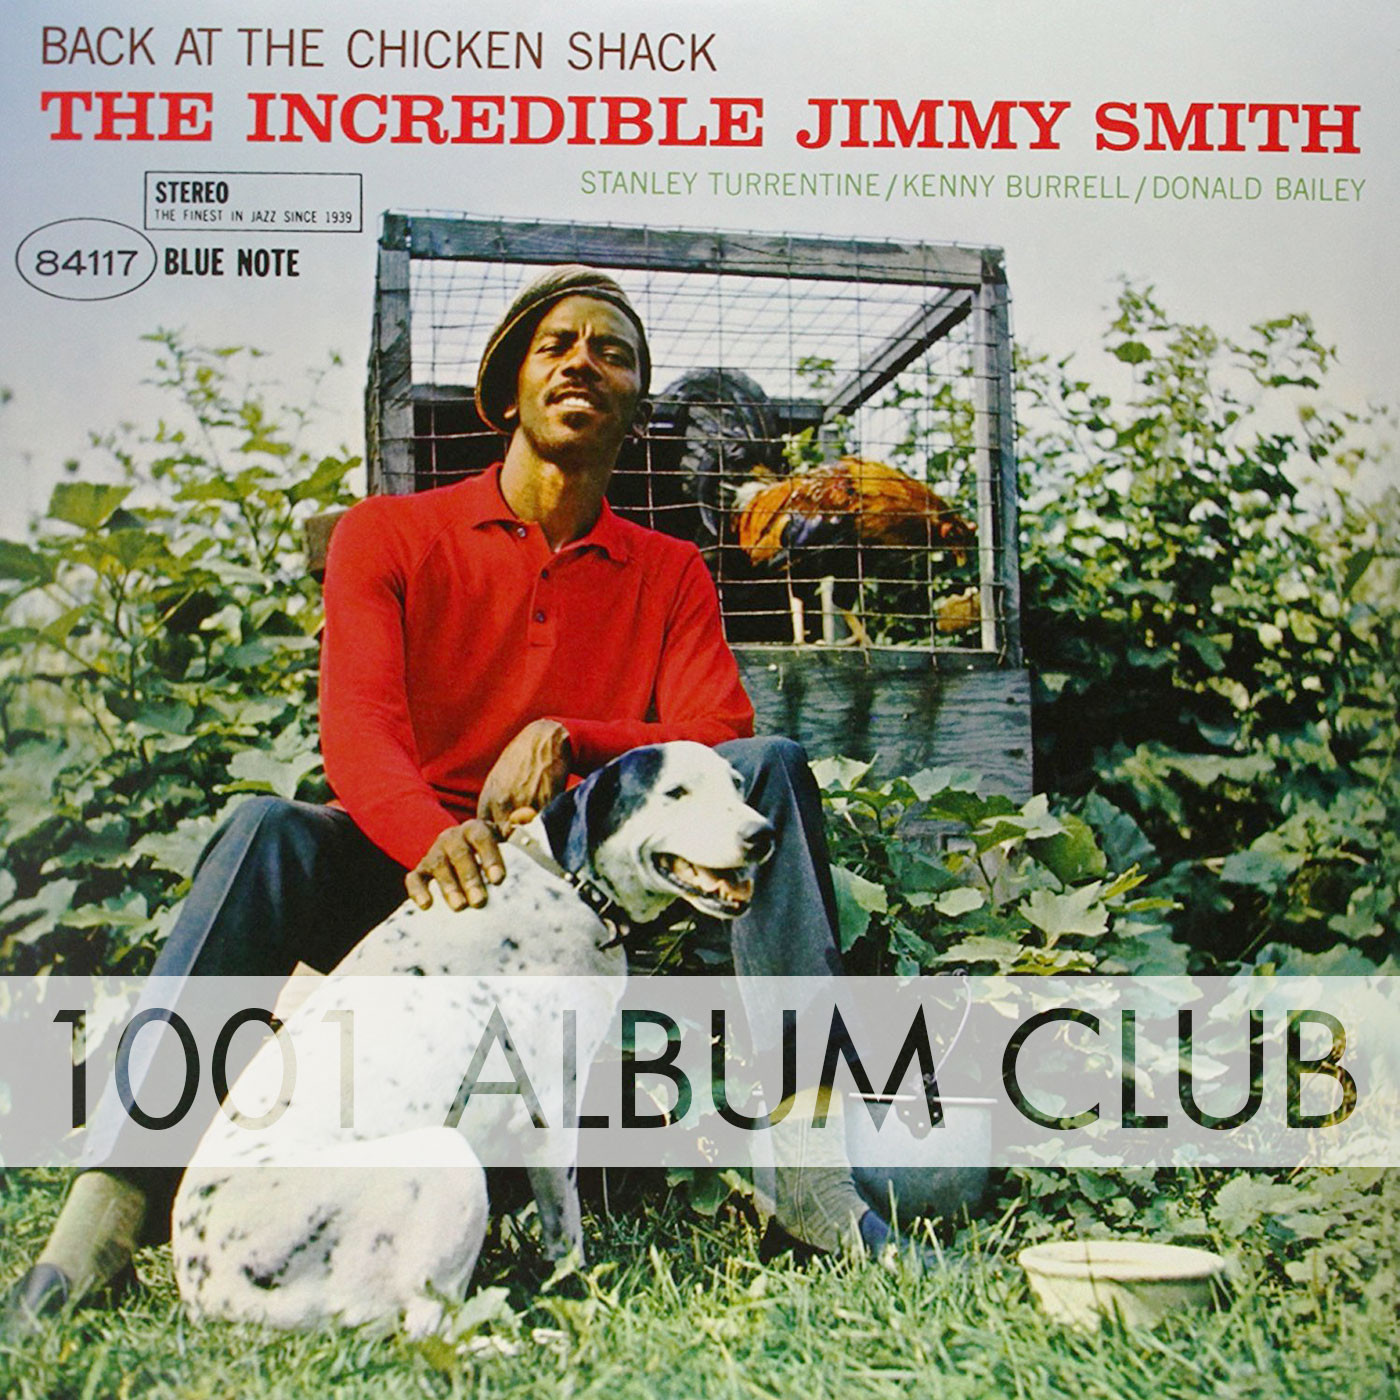 028 Jimmy Smith – Back at the Chicken Shack – 1001 Album Club